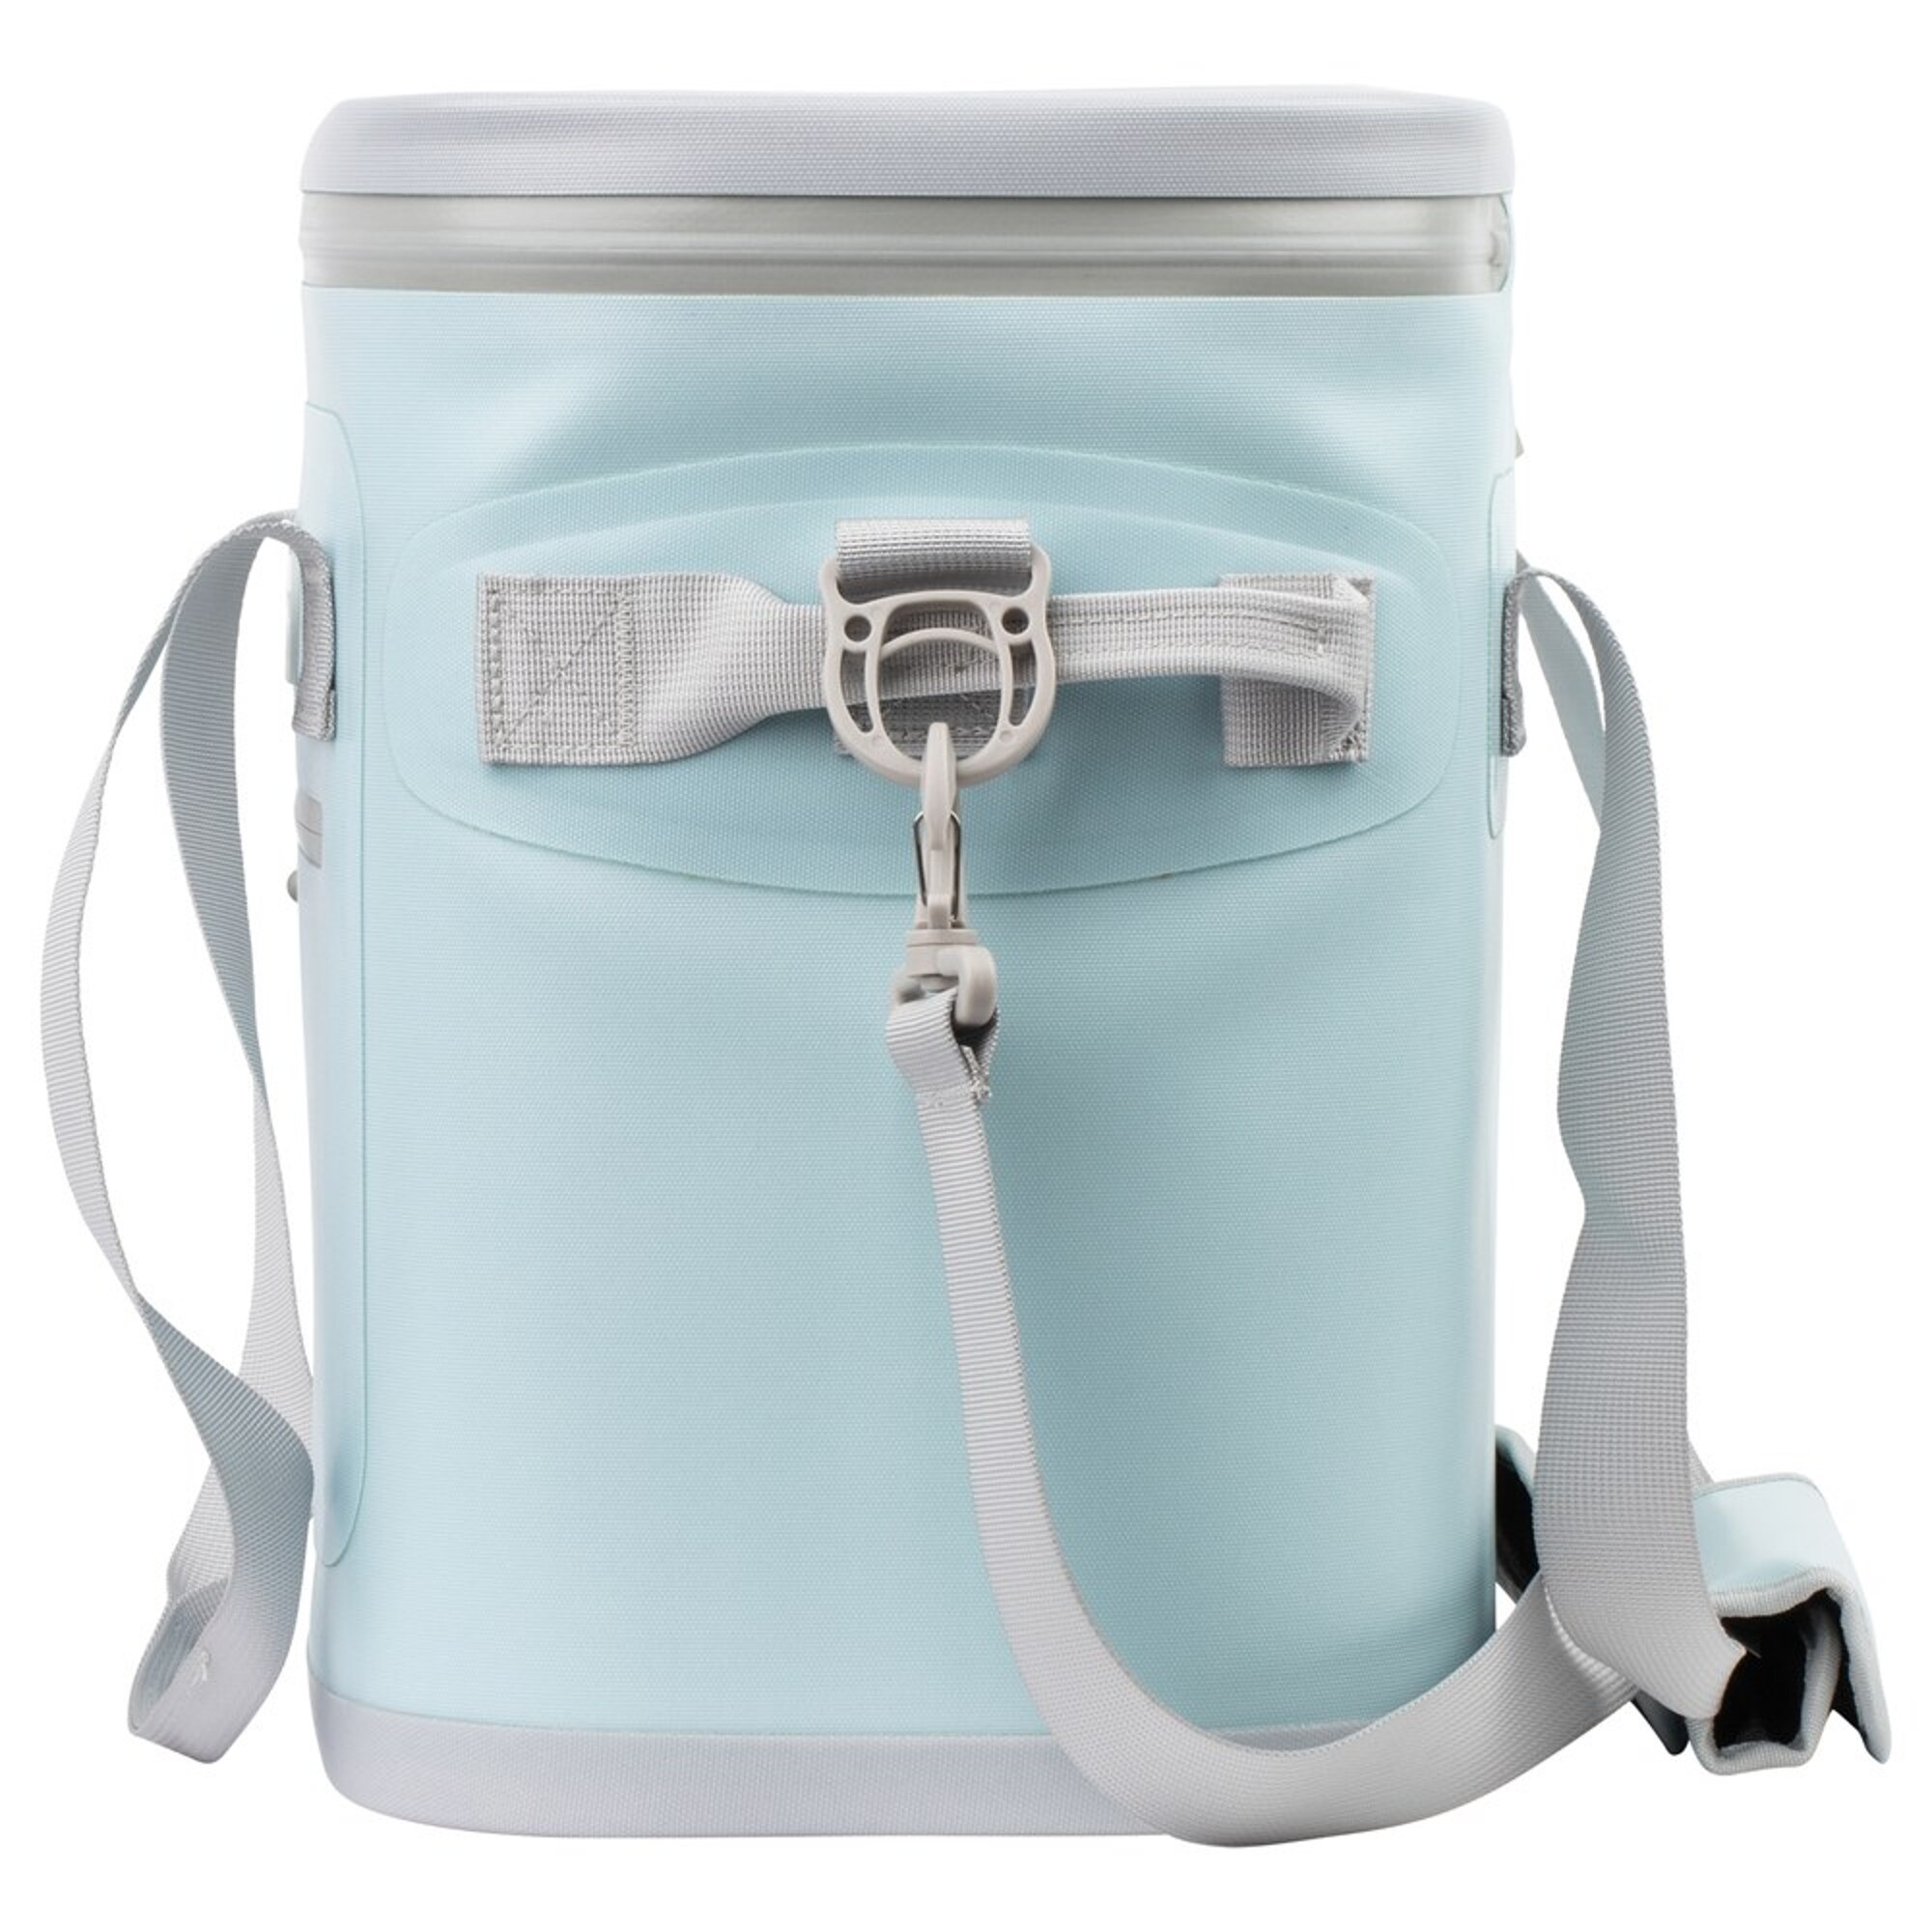 RTIC Outdoors Soft Pack Sky Blue 20 Cans Insulated Drink Carrier